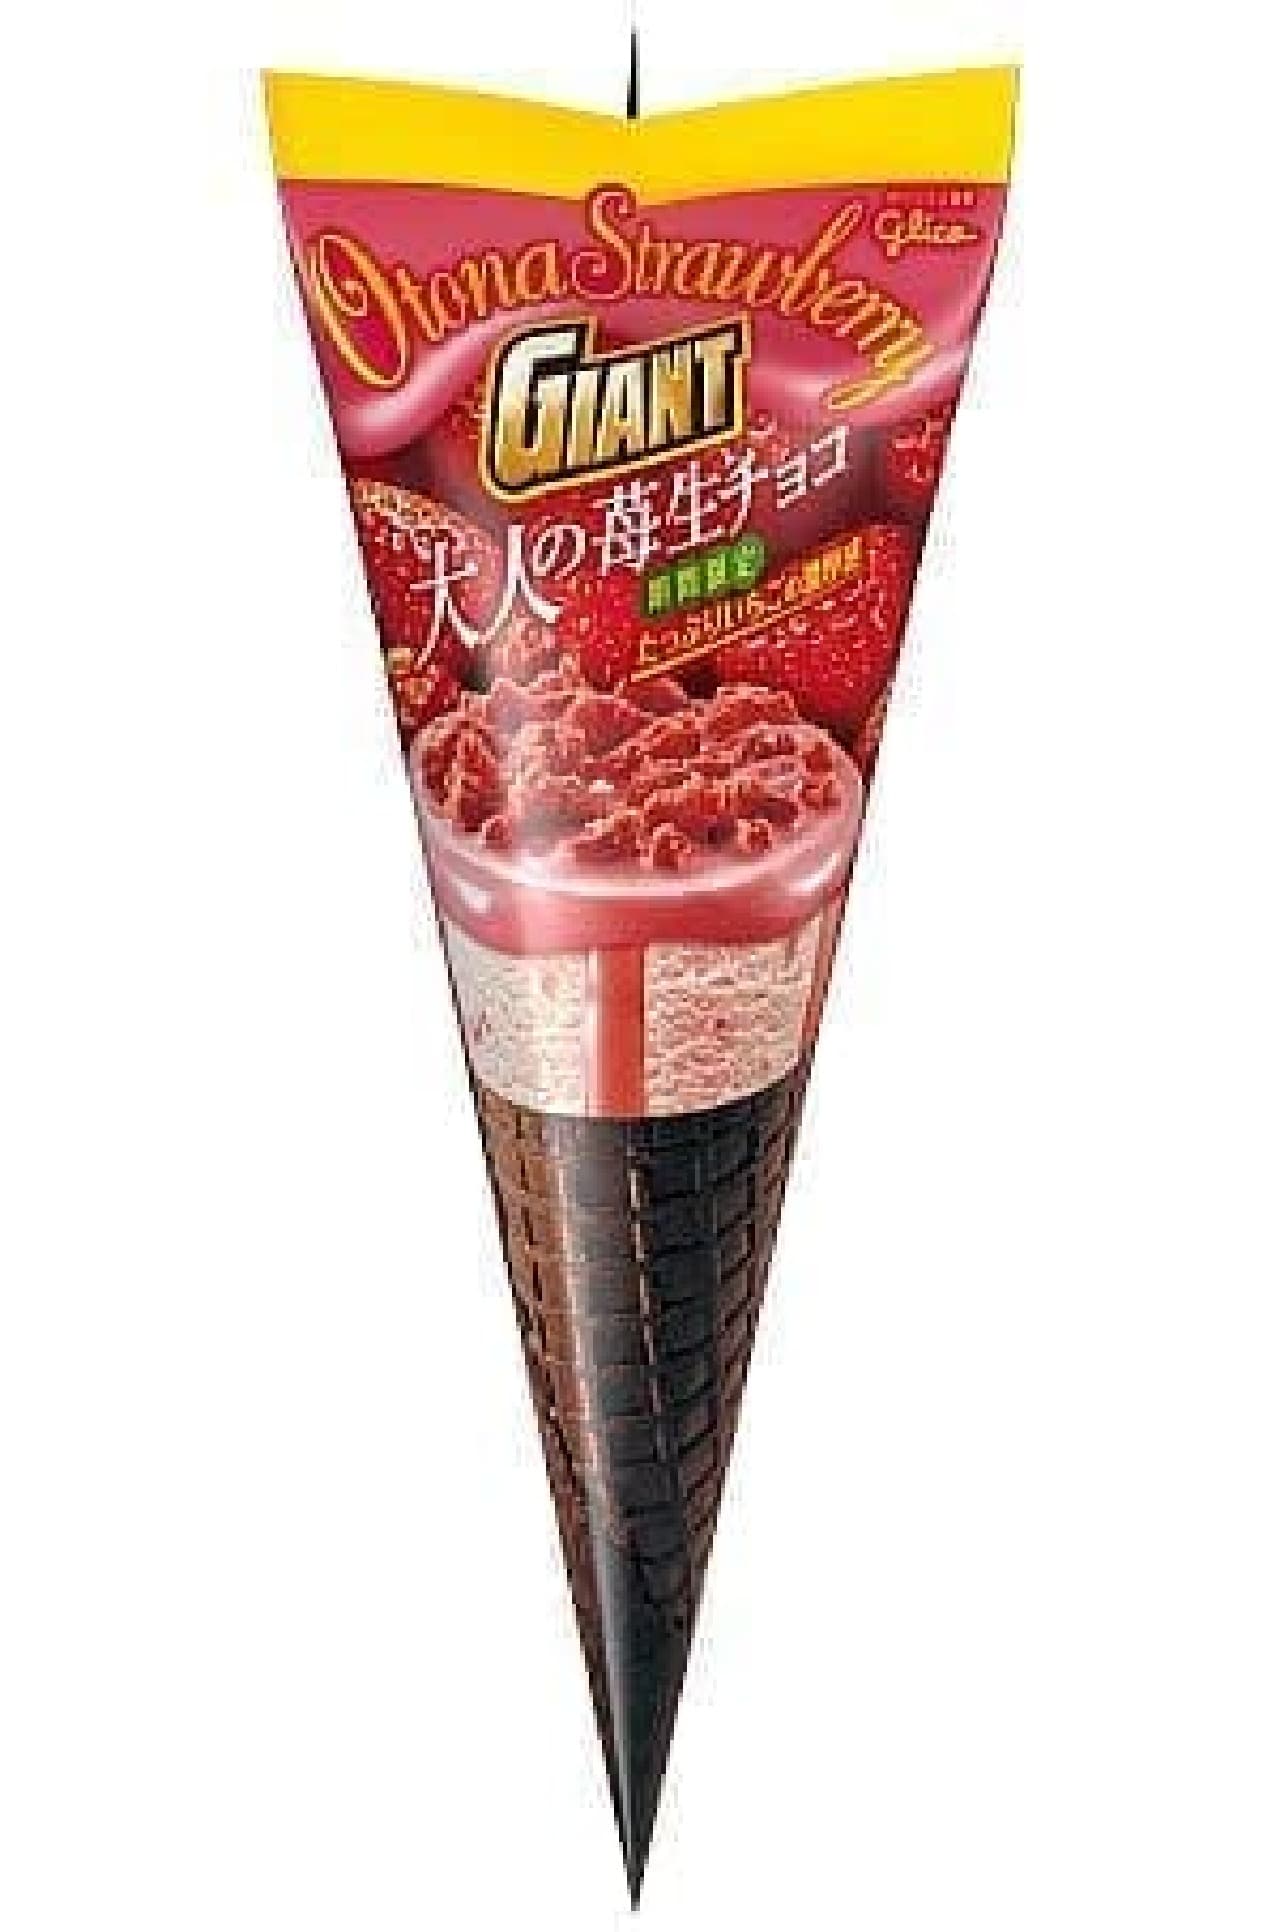 Giant Cone [Adult Strawberry Chocolate]